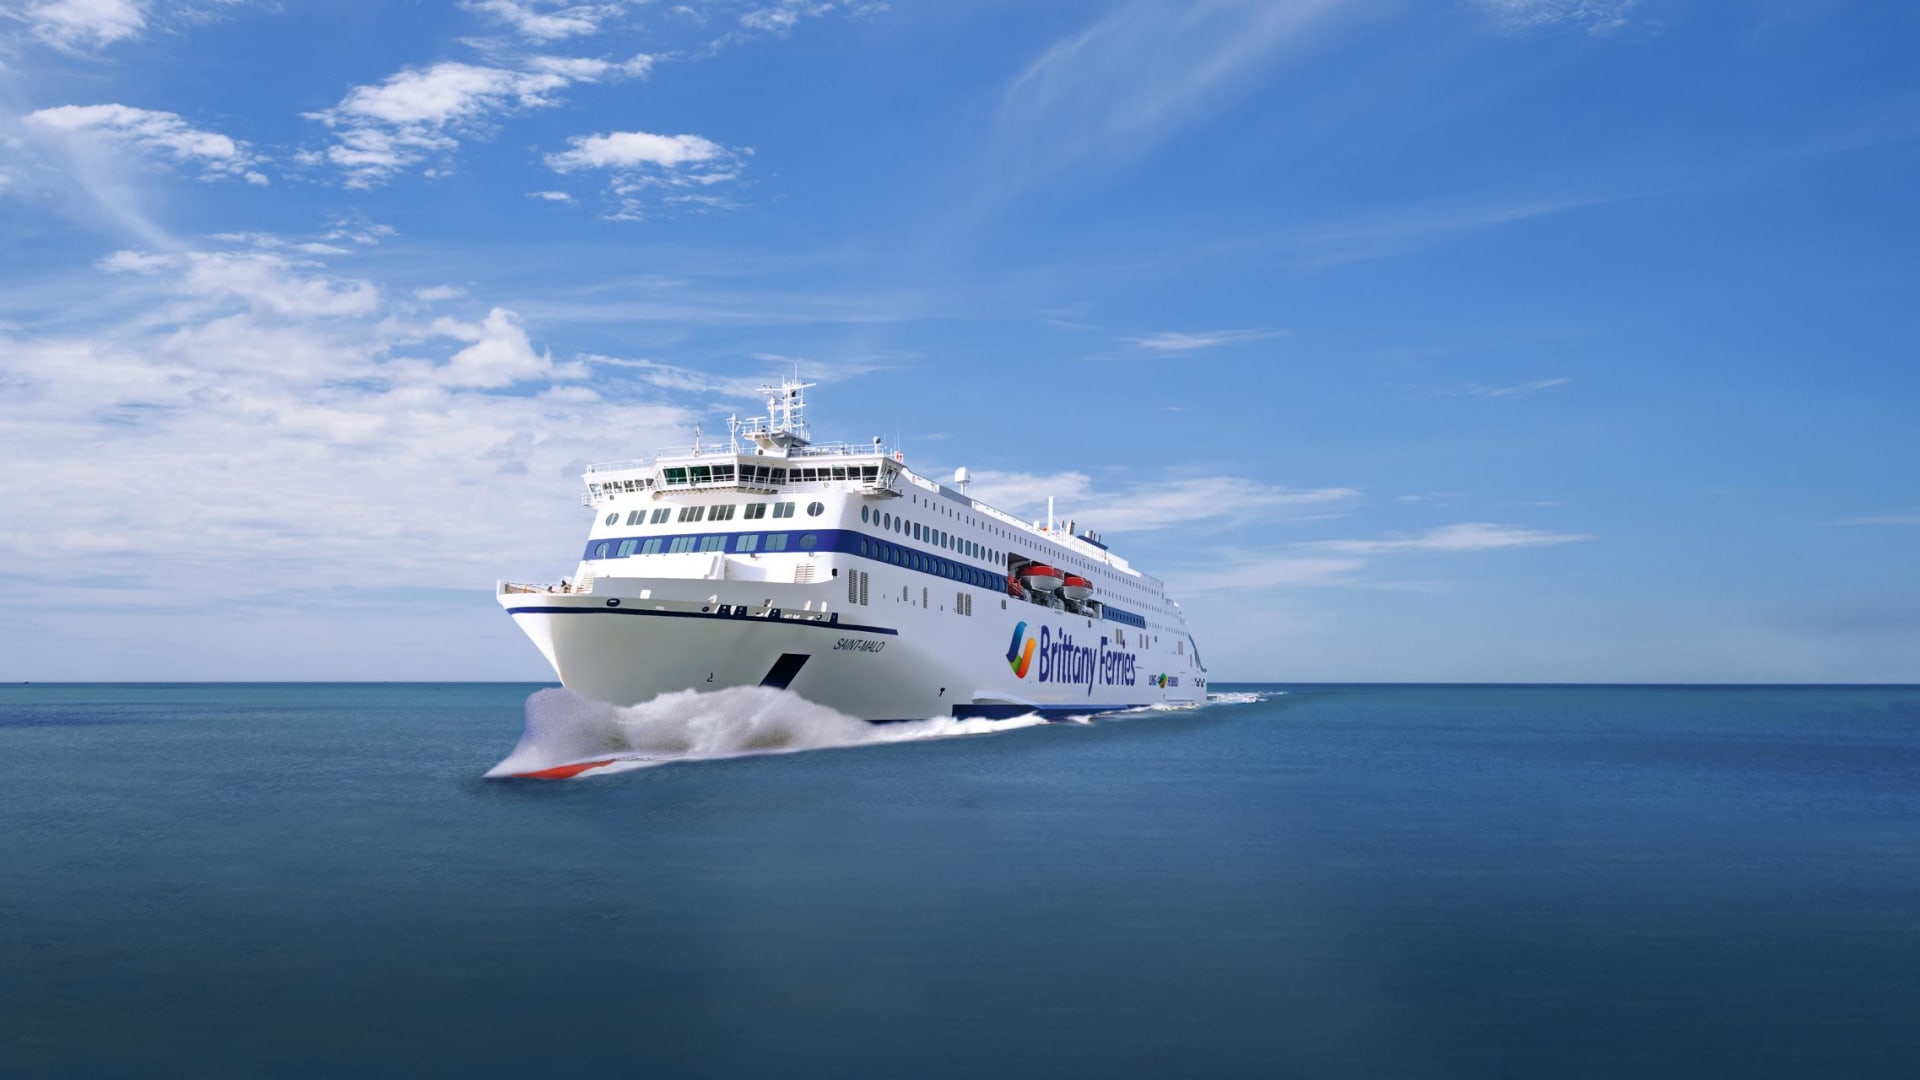 Global’s greatest hybrid send to ferry passengers between UK, France